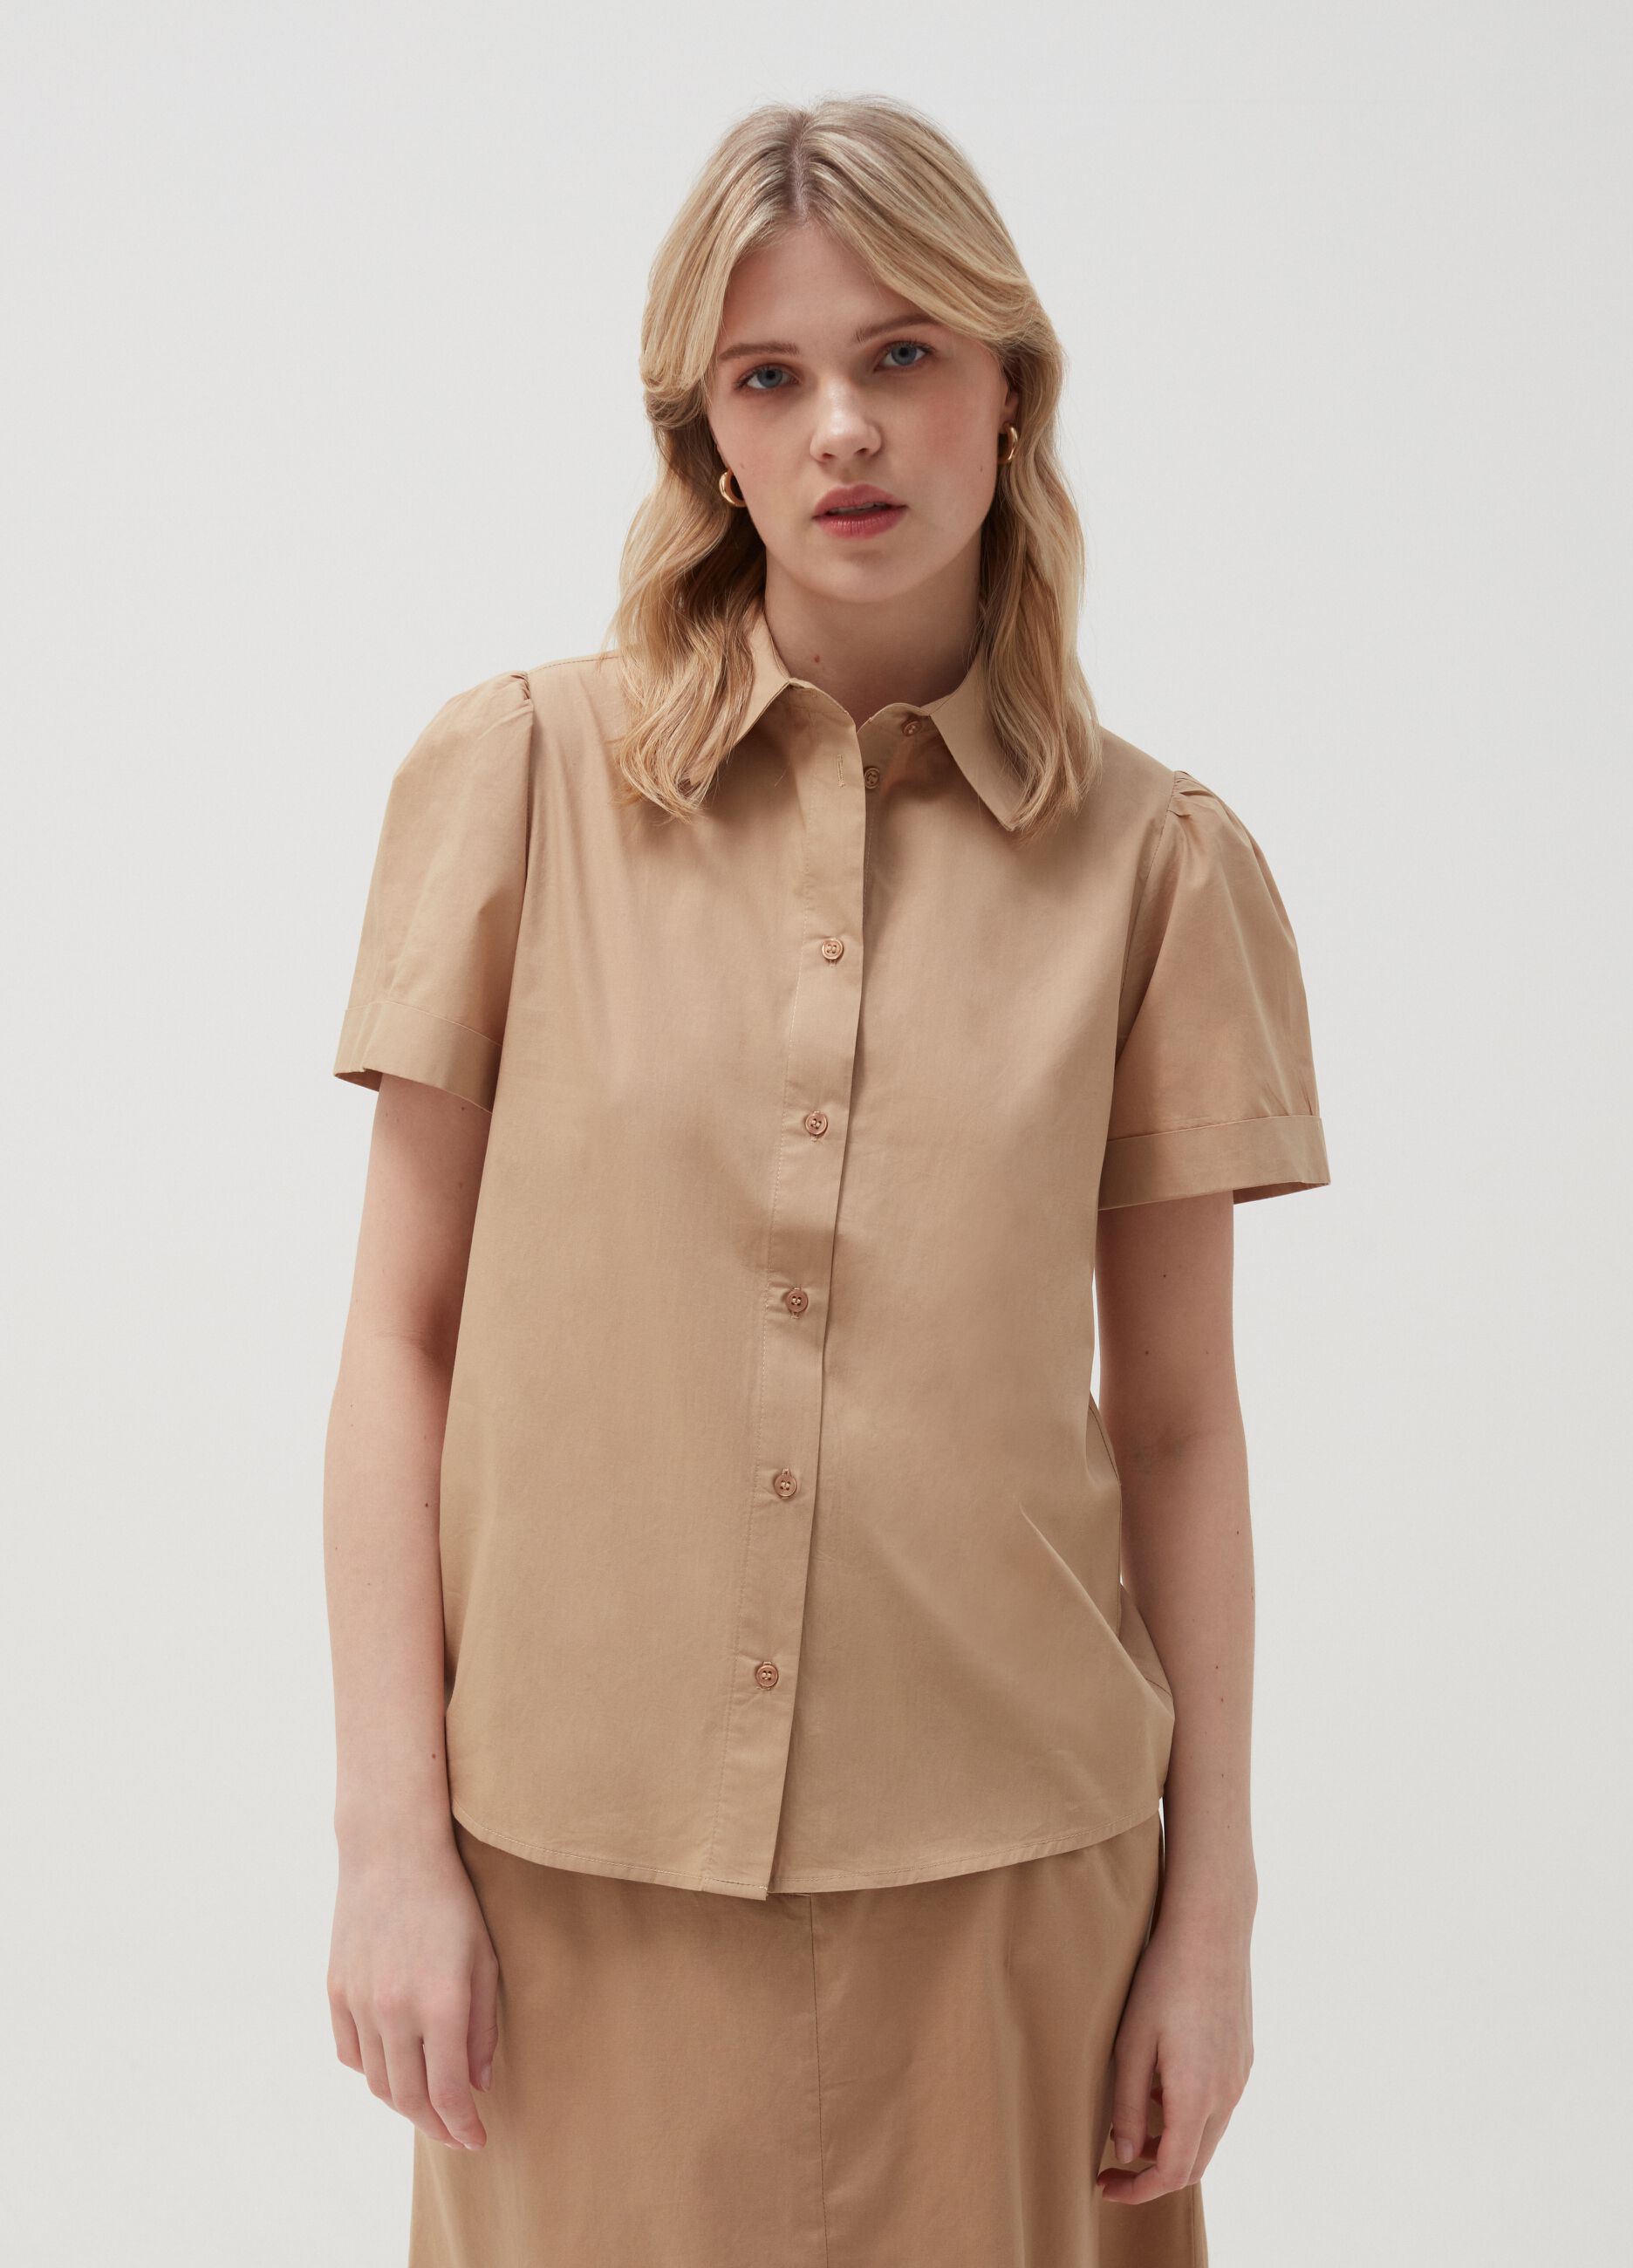 Shirt with short puffed sleeves